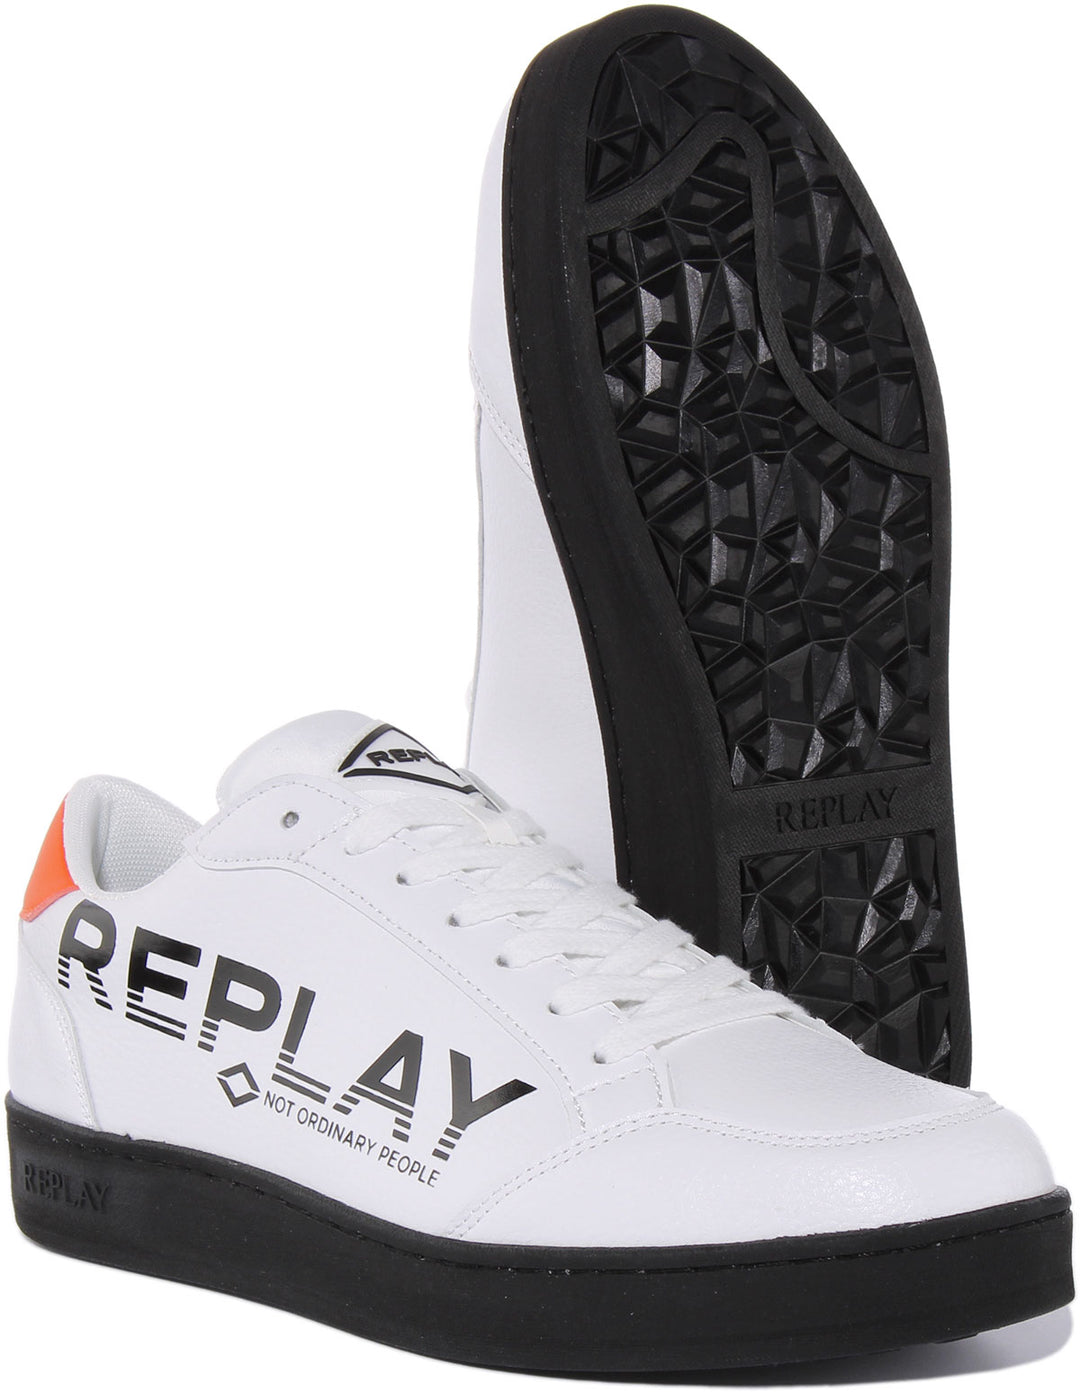 REPLAY Bring Print Leather Sneakers - White